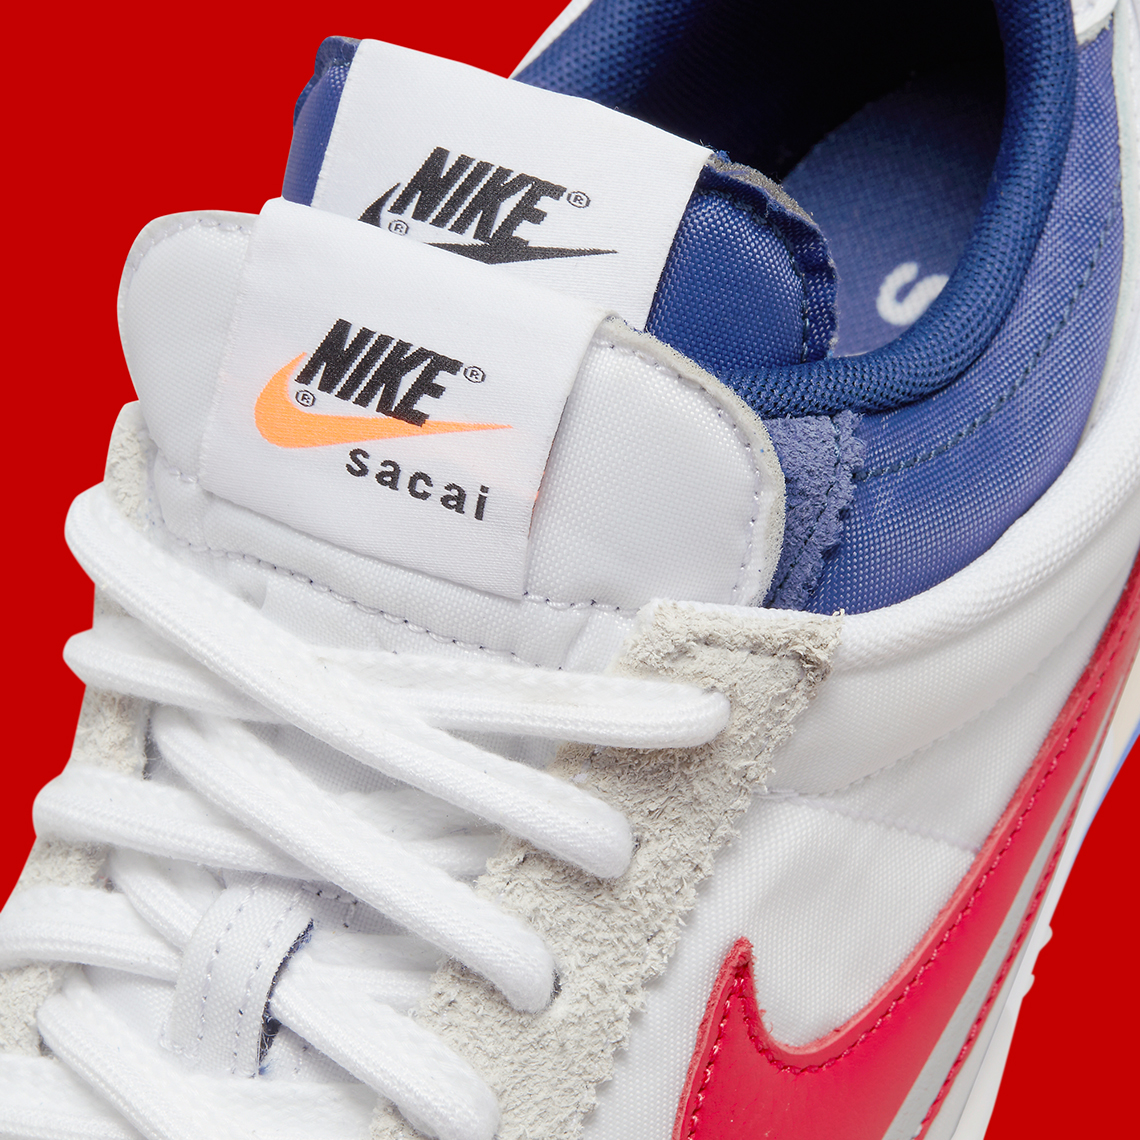 Sacai package Nike Cortez 4 0 White Red Royal Dq0581 100 Release Date 6